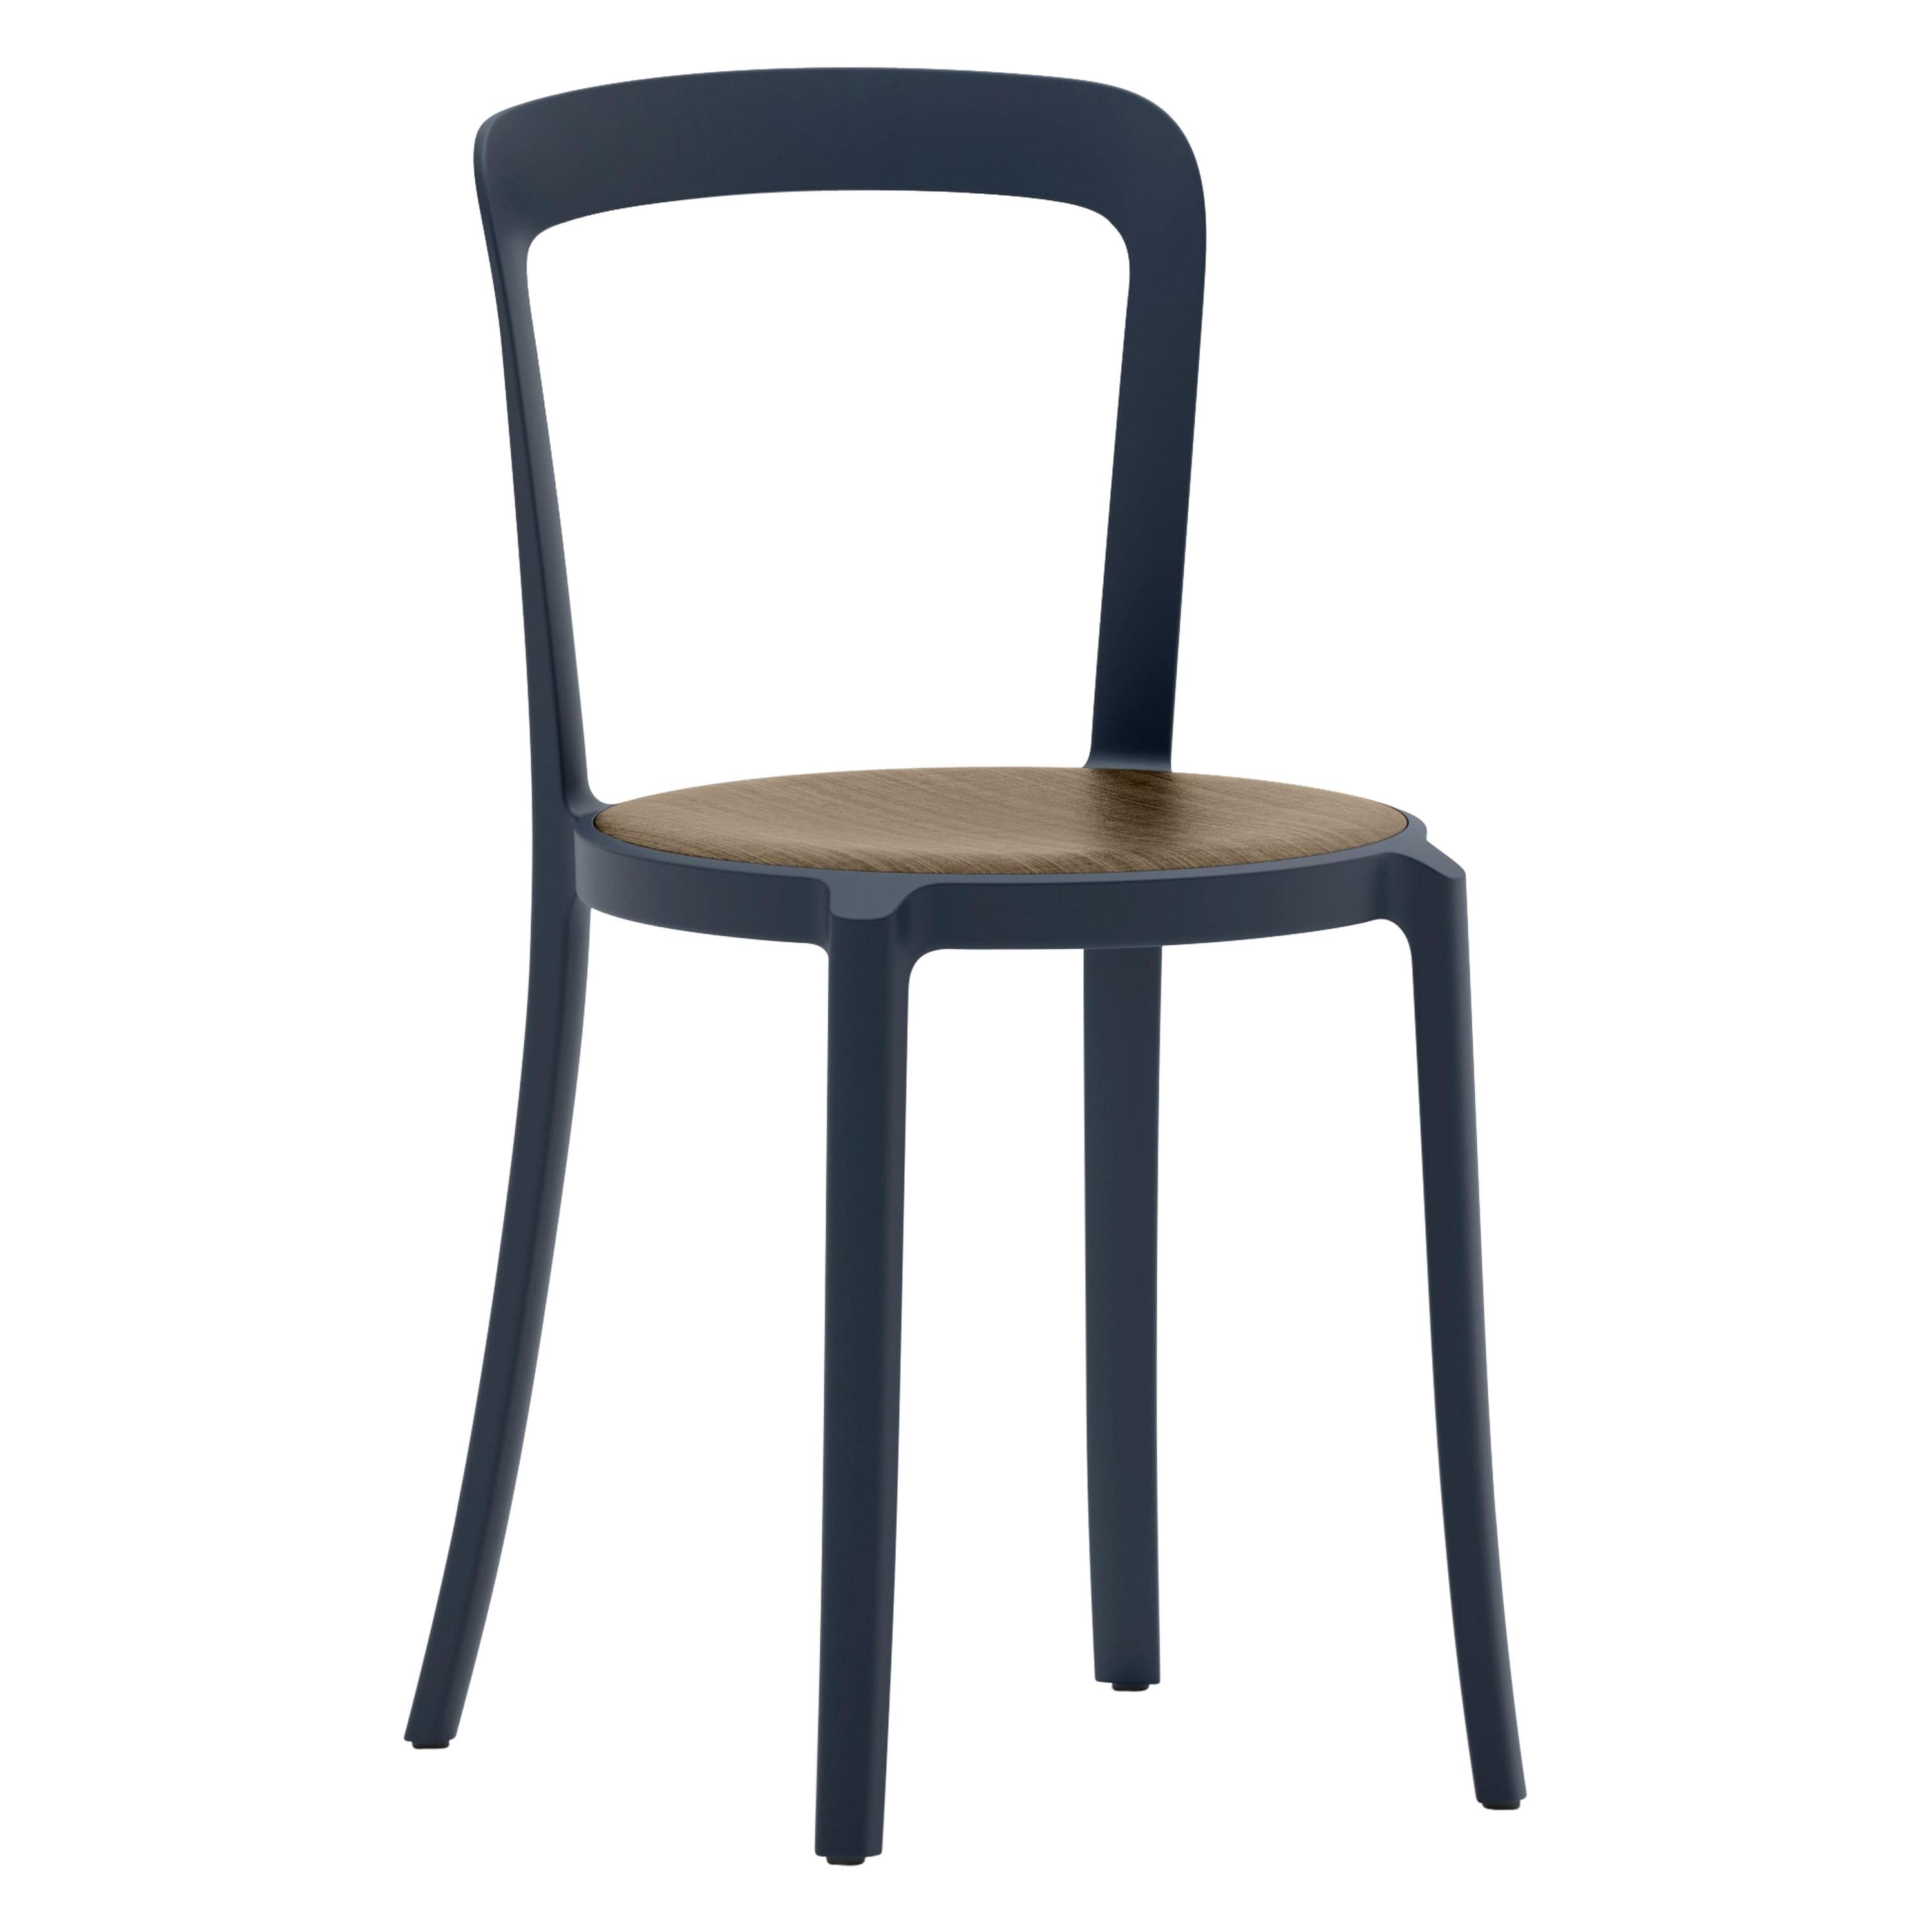 Emeco On & On Stacking Chair in Dark Blue with Walnut seat by Barber & Osgerby